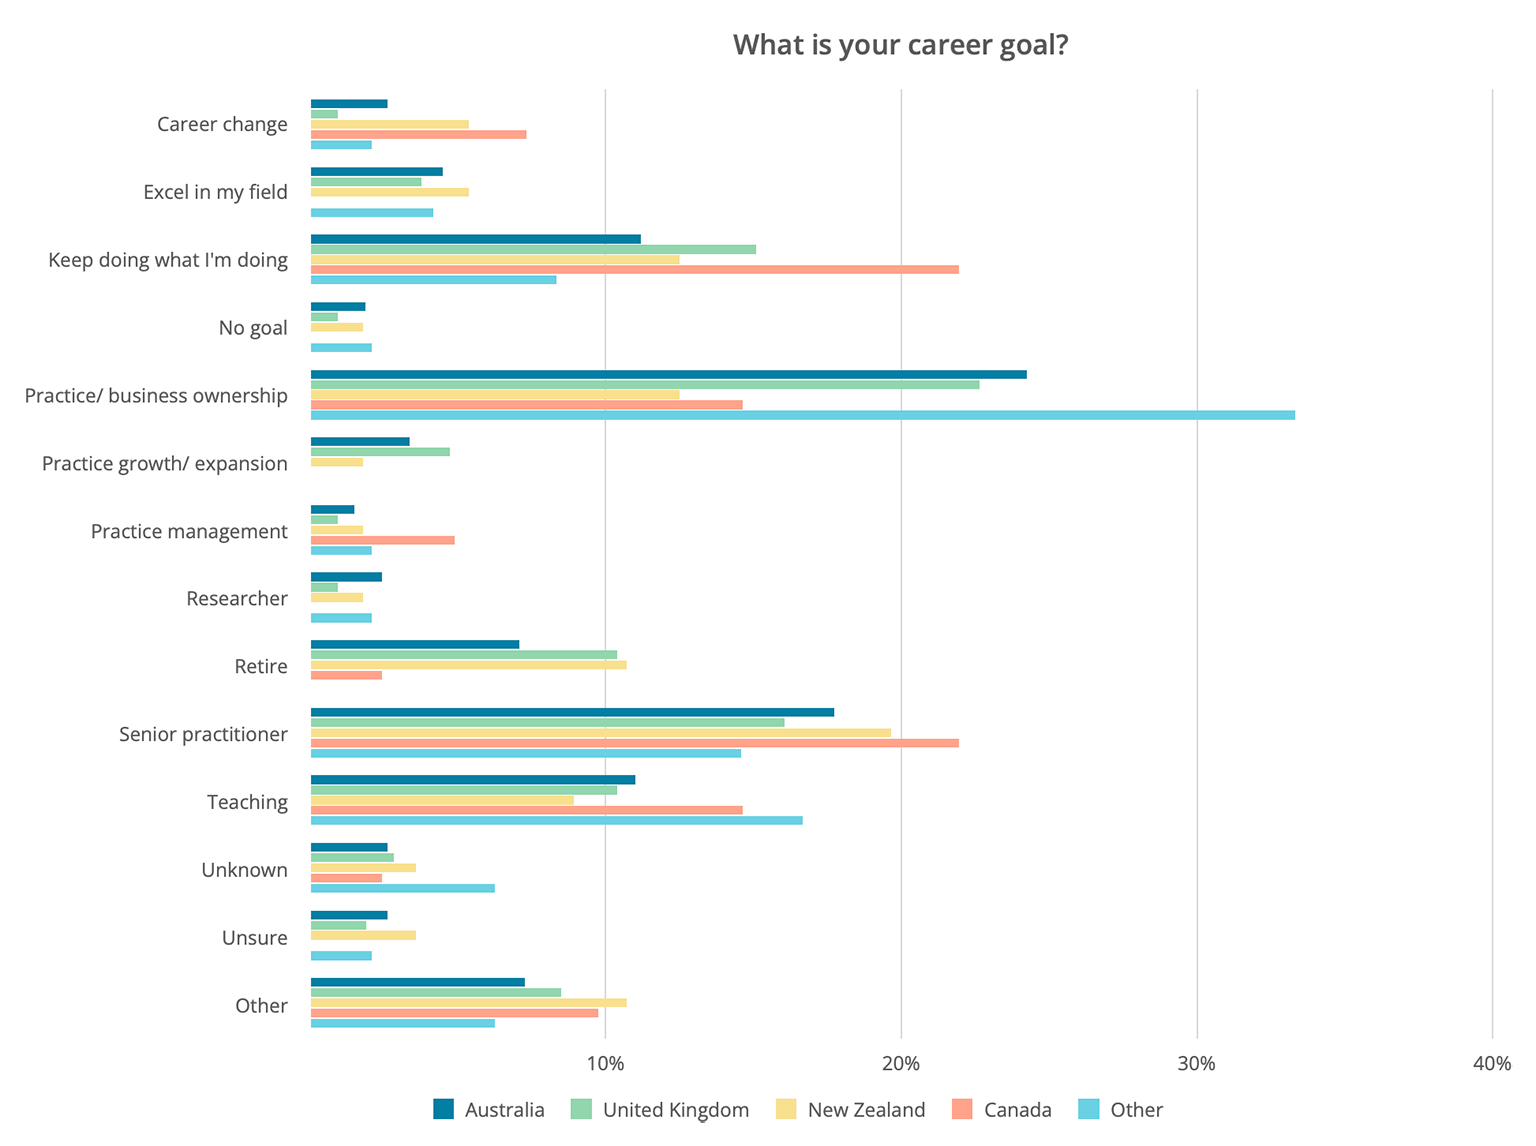 Graph of career goals for allied health professionals